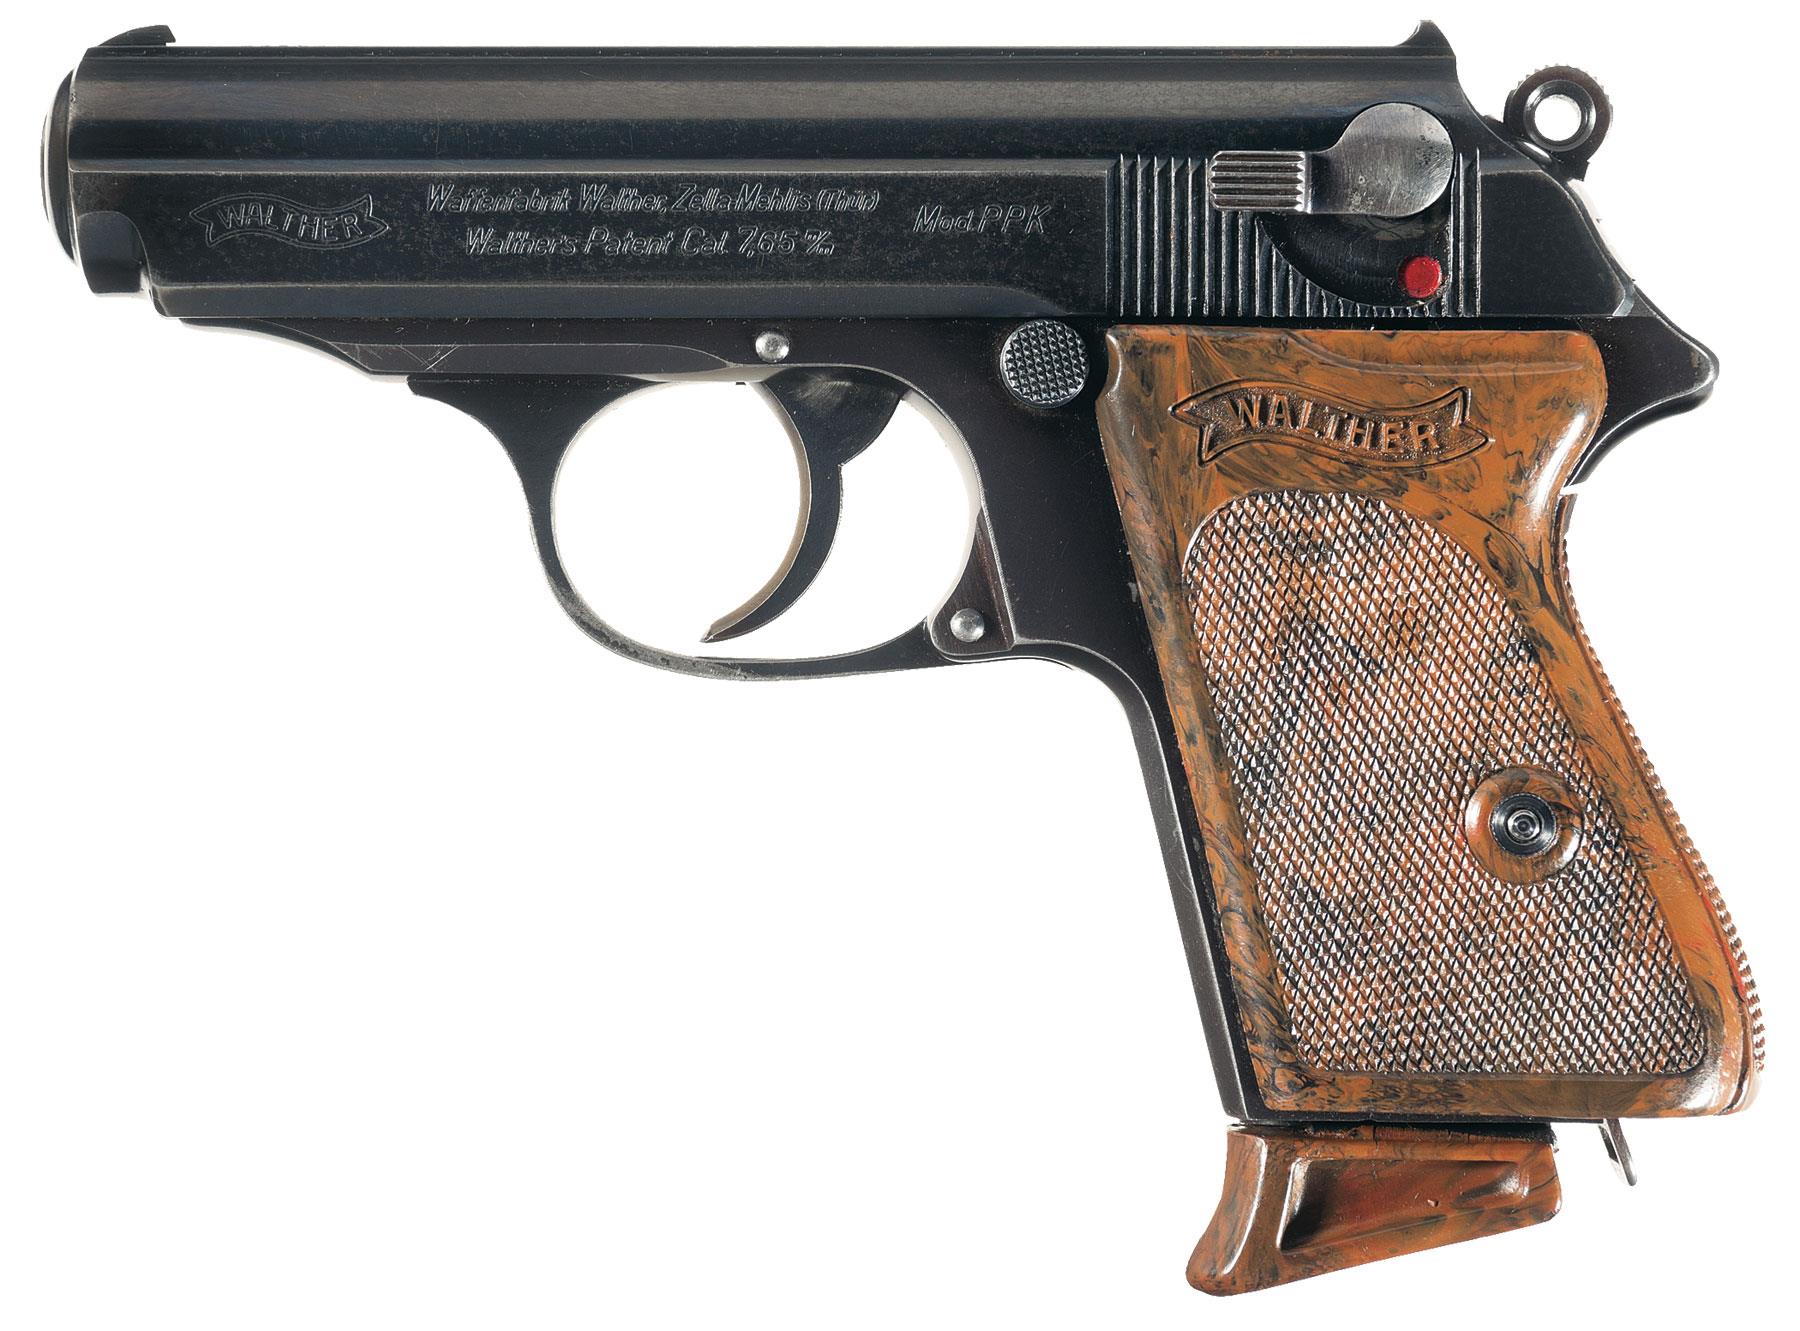 walther ppk serial number lookup